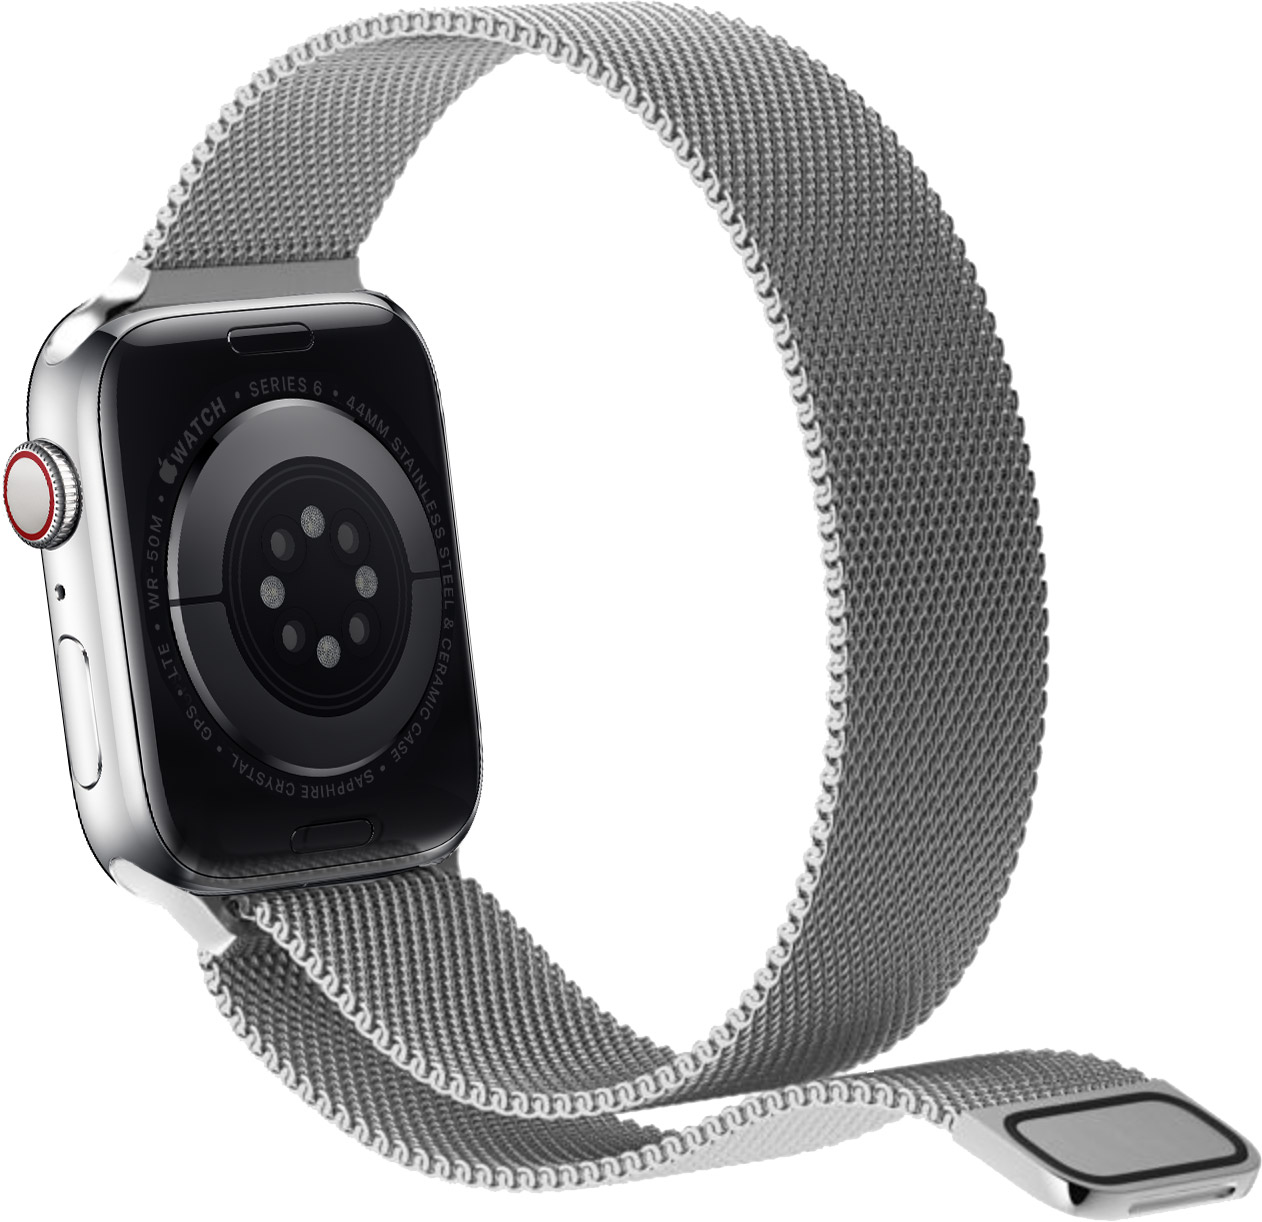 Apple Watch with Milanese Loop band